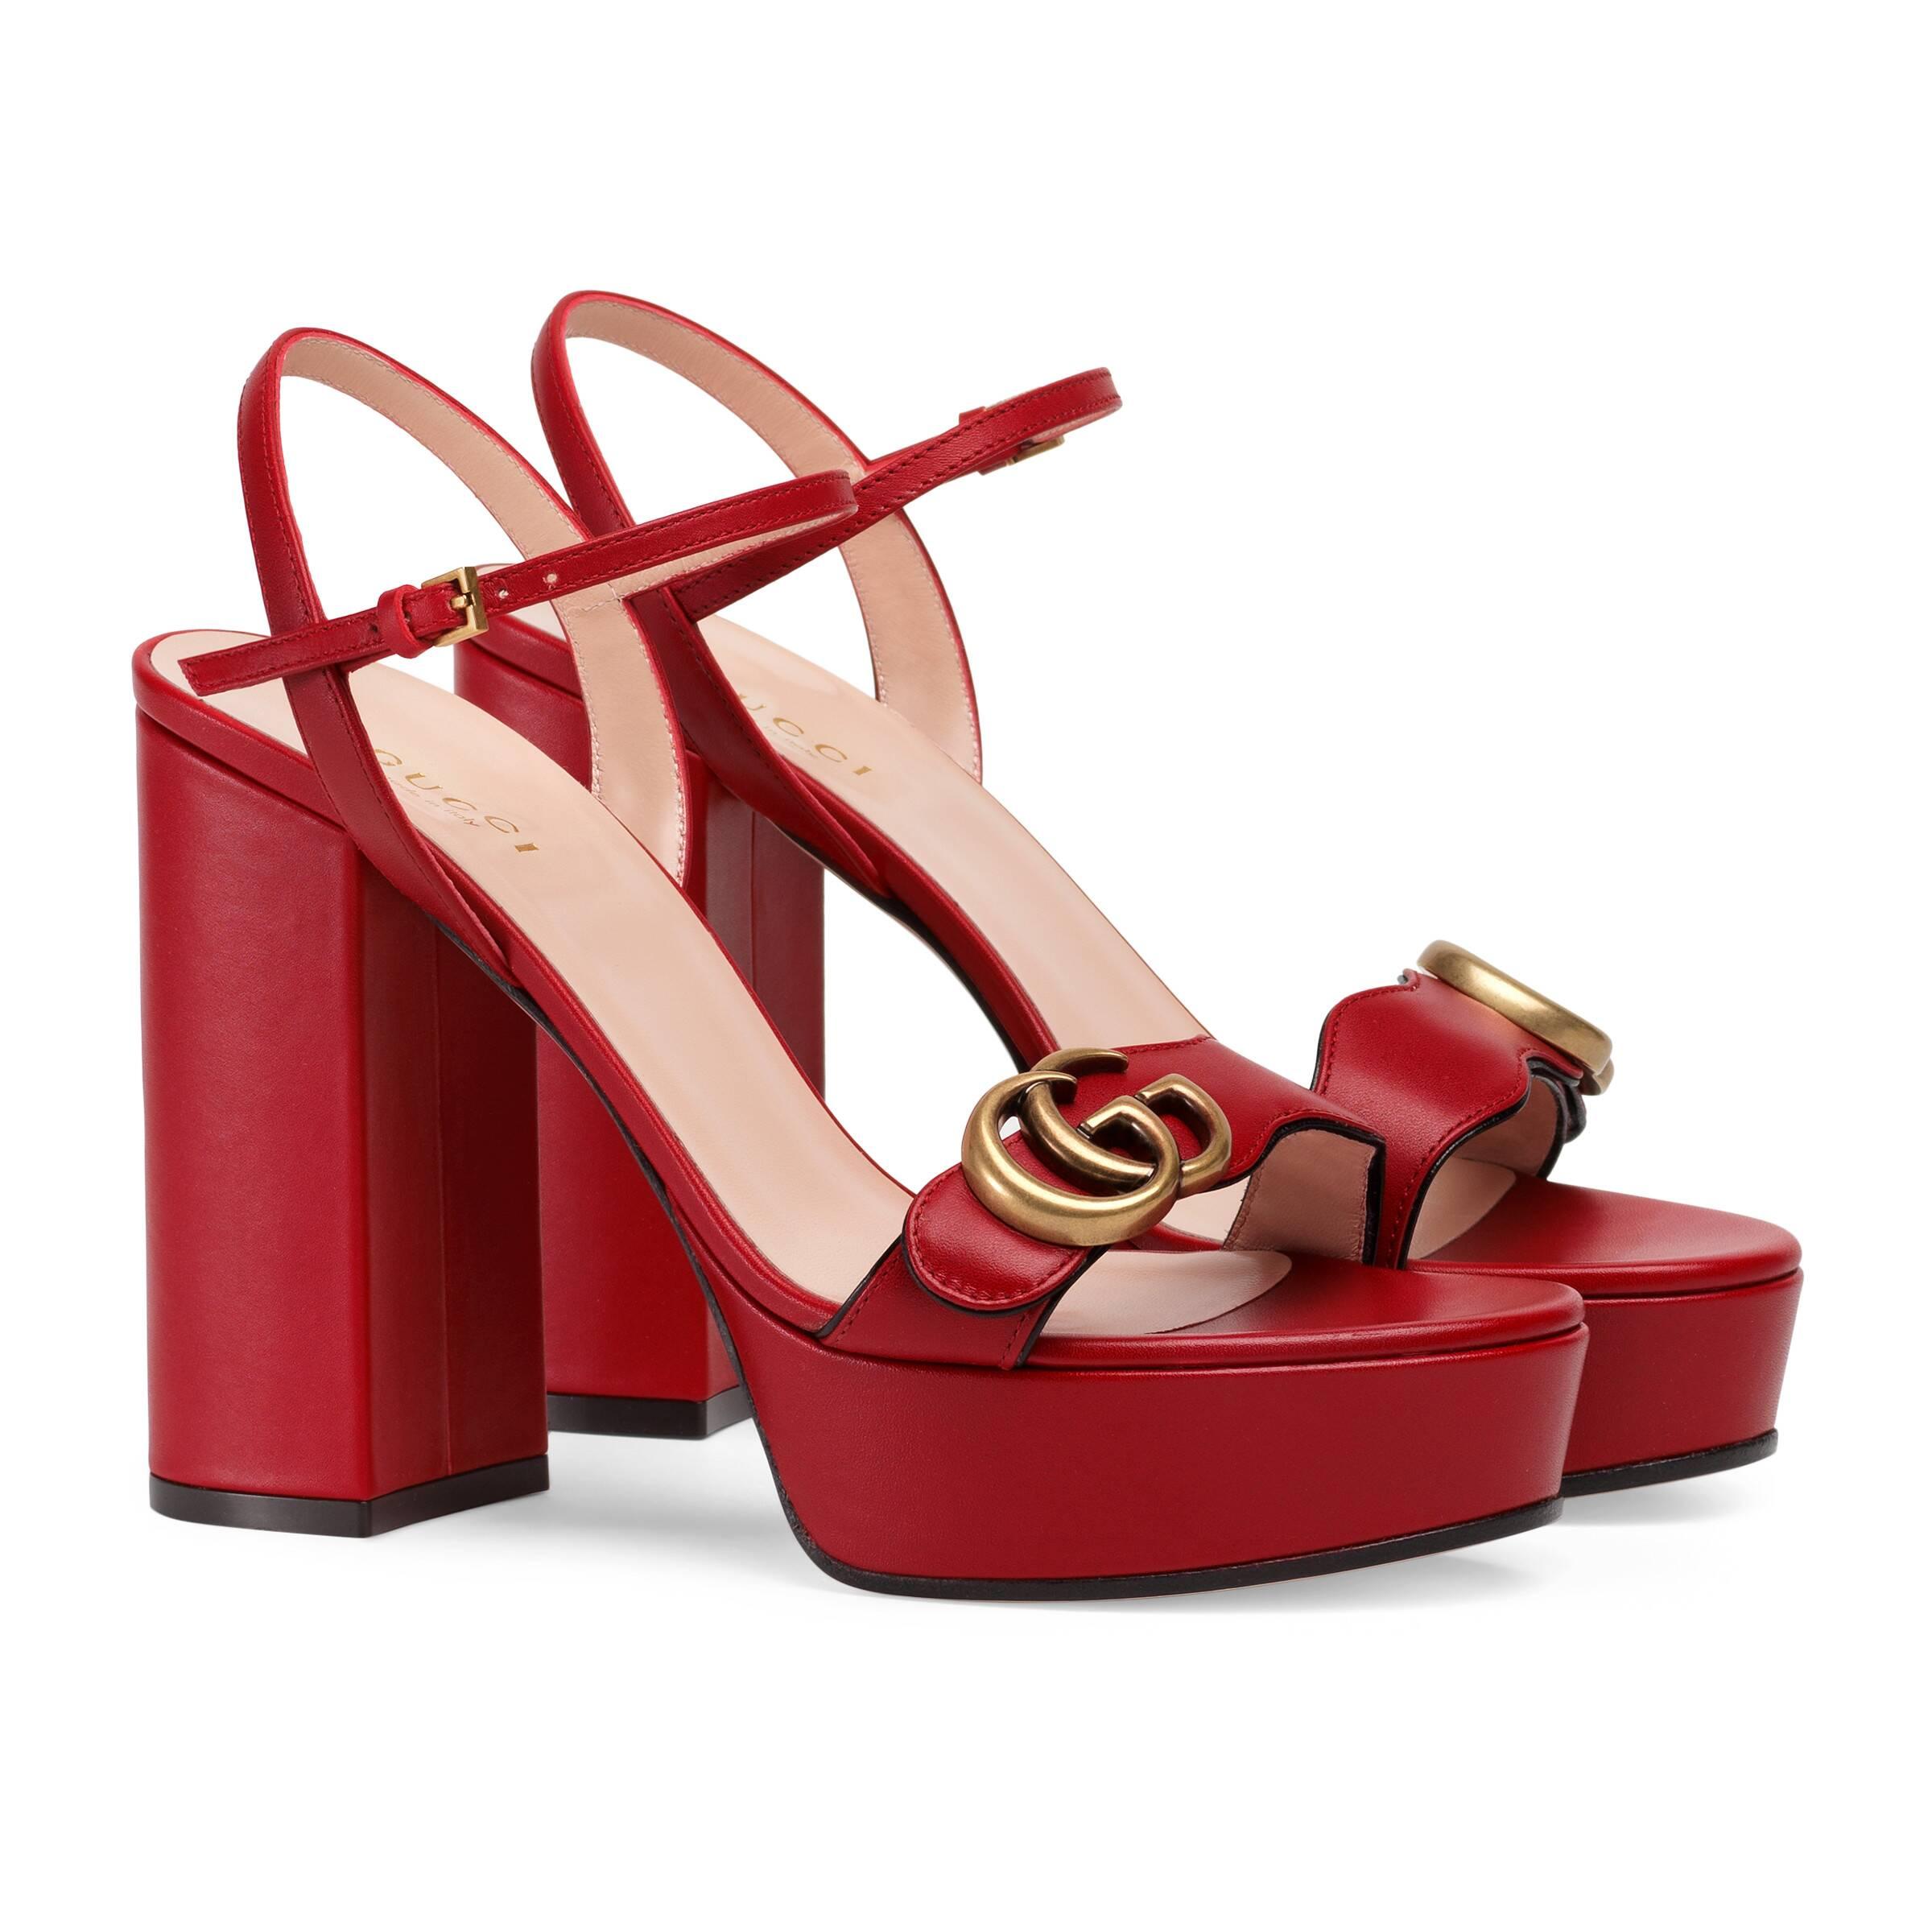 Gucci Leather Platform Sandal With Double G in Red - Save 18% - Lyst